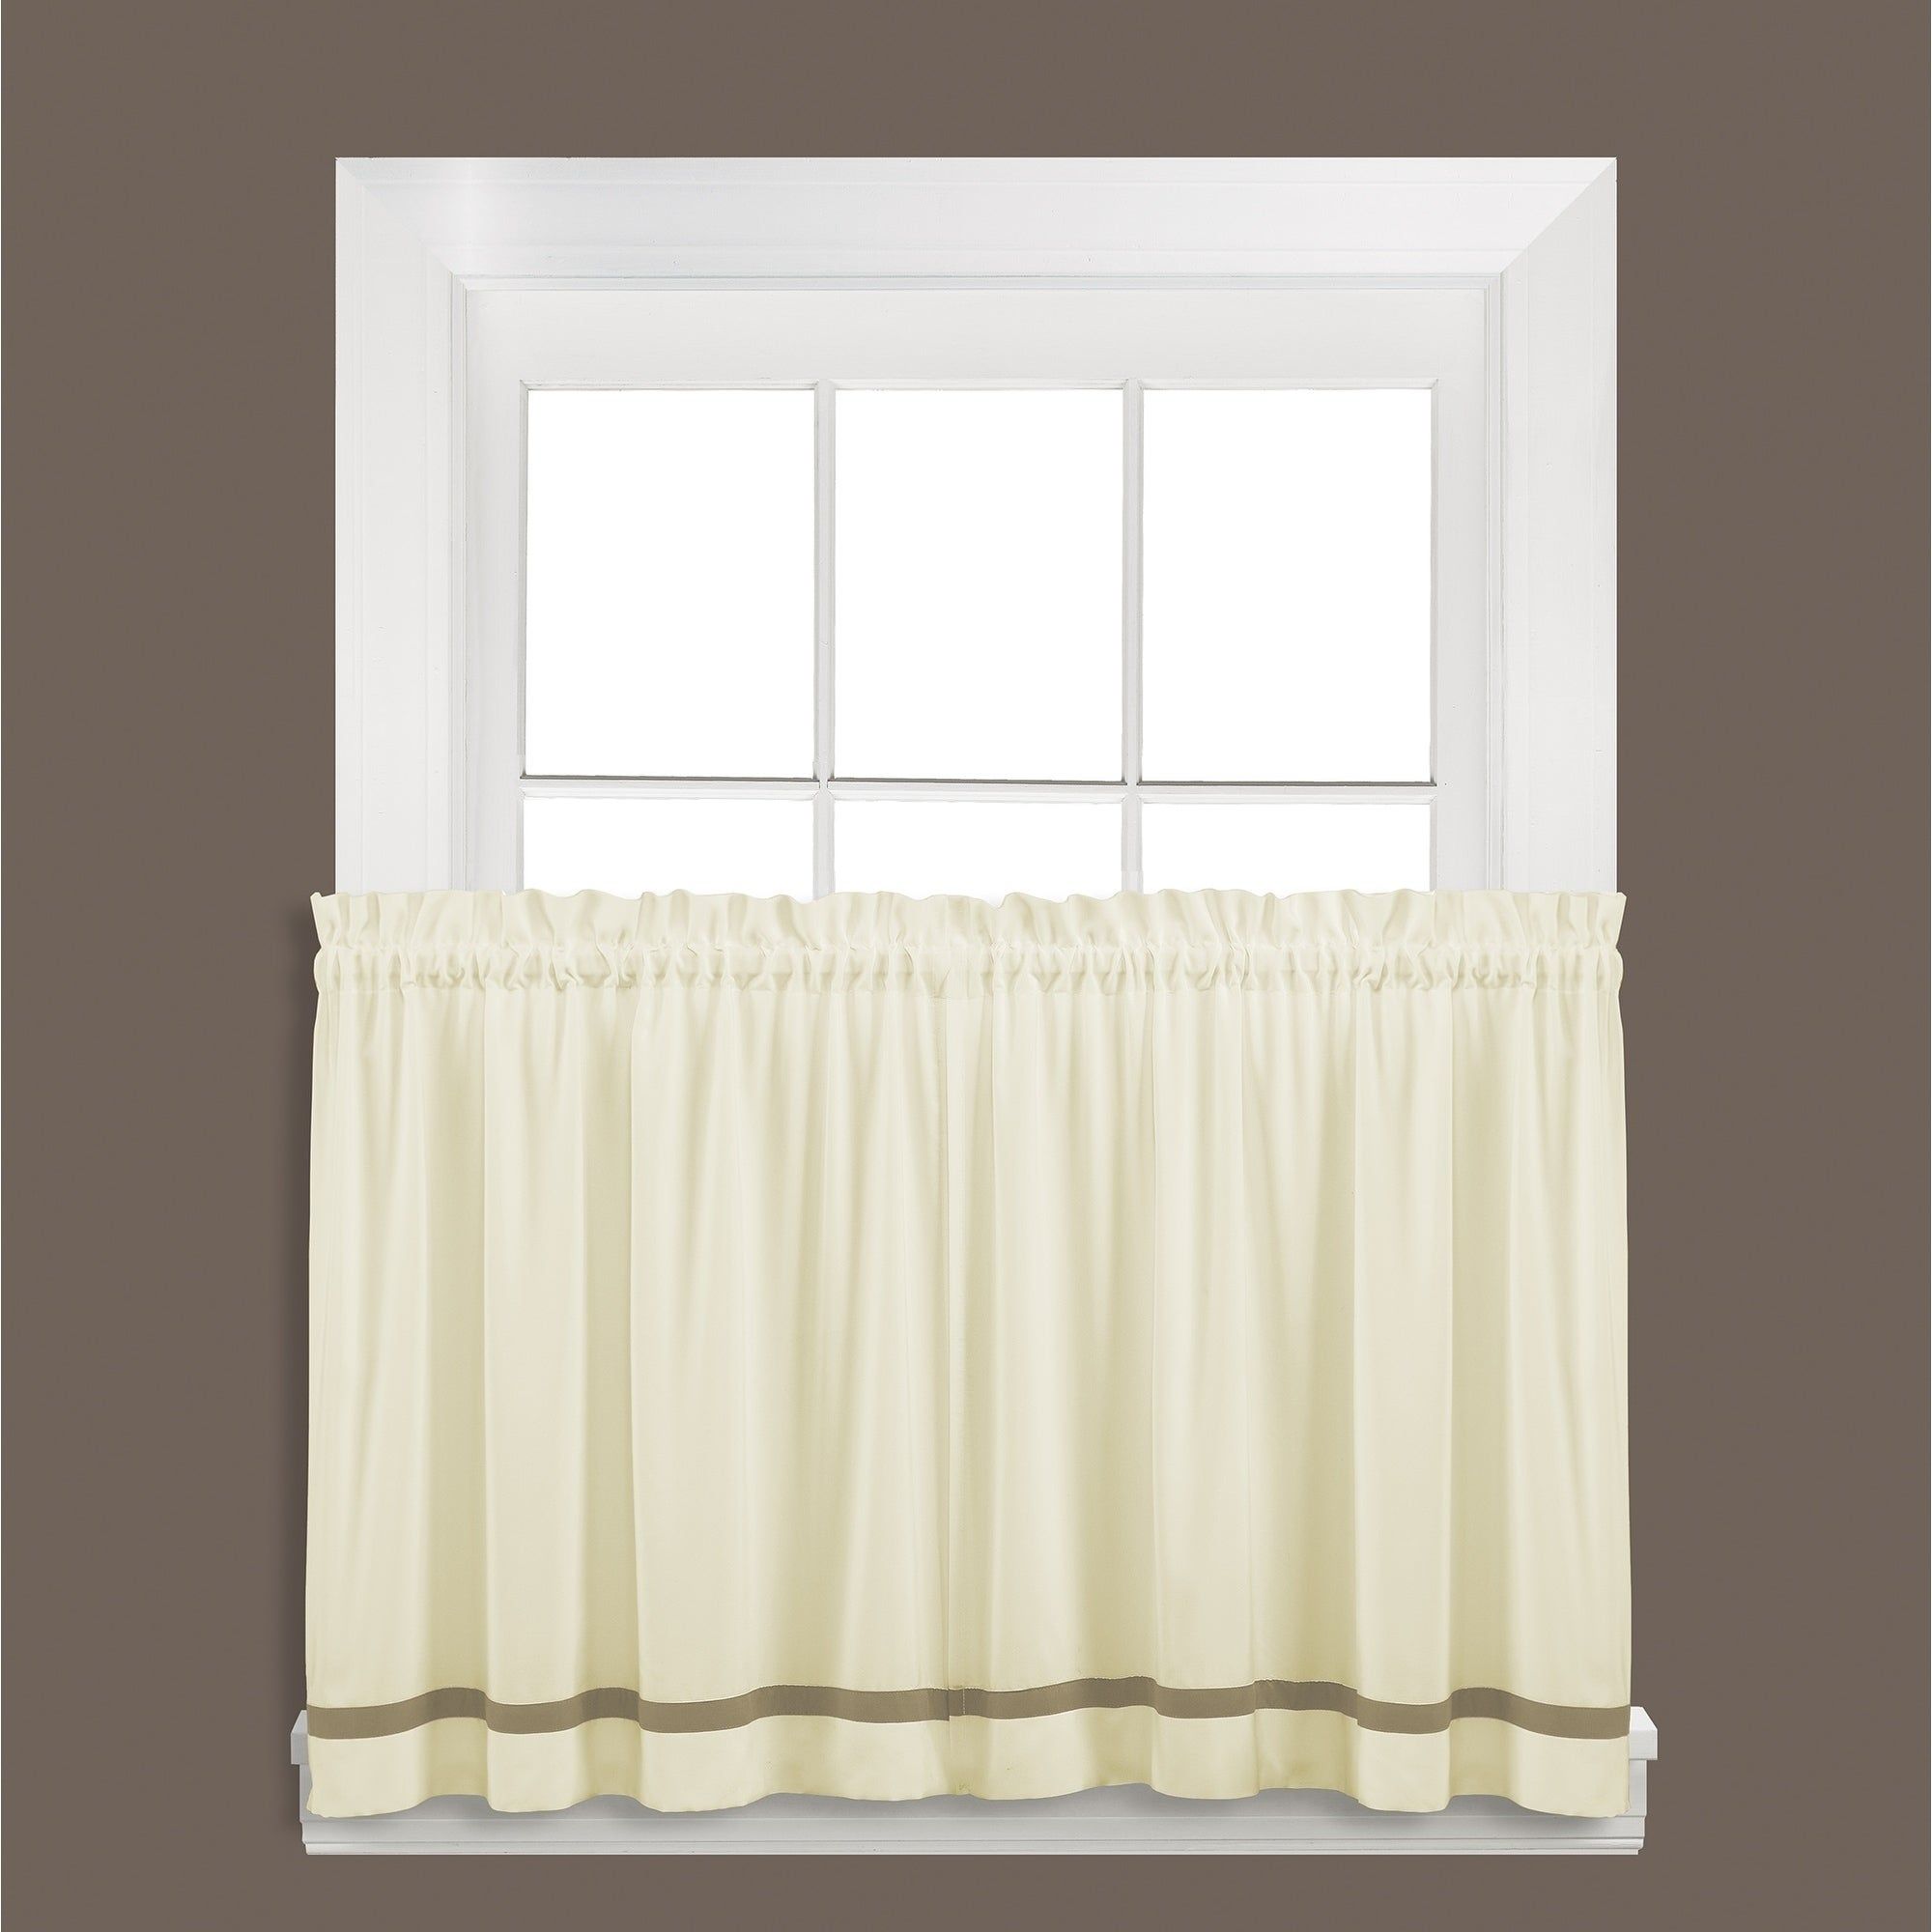 Details About Skl Home Kate 36 Inch Tier Pair In Natural Natural For Waverly Felicite Curtain Tiers (View 15 of 20)